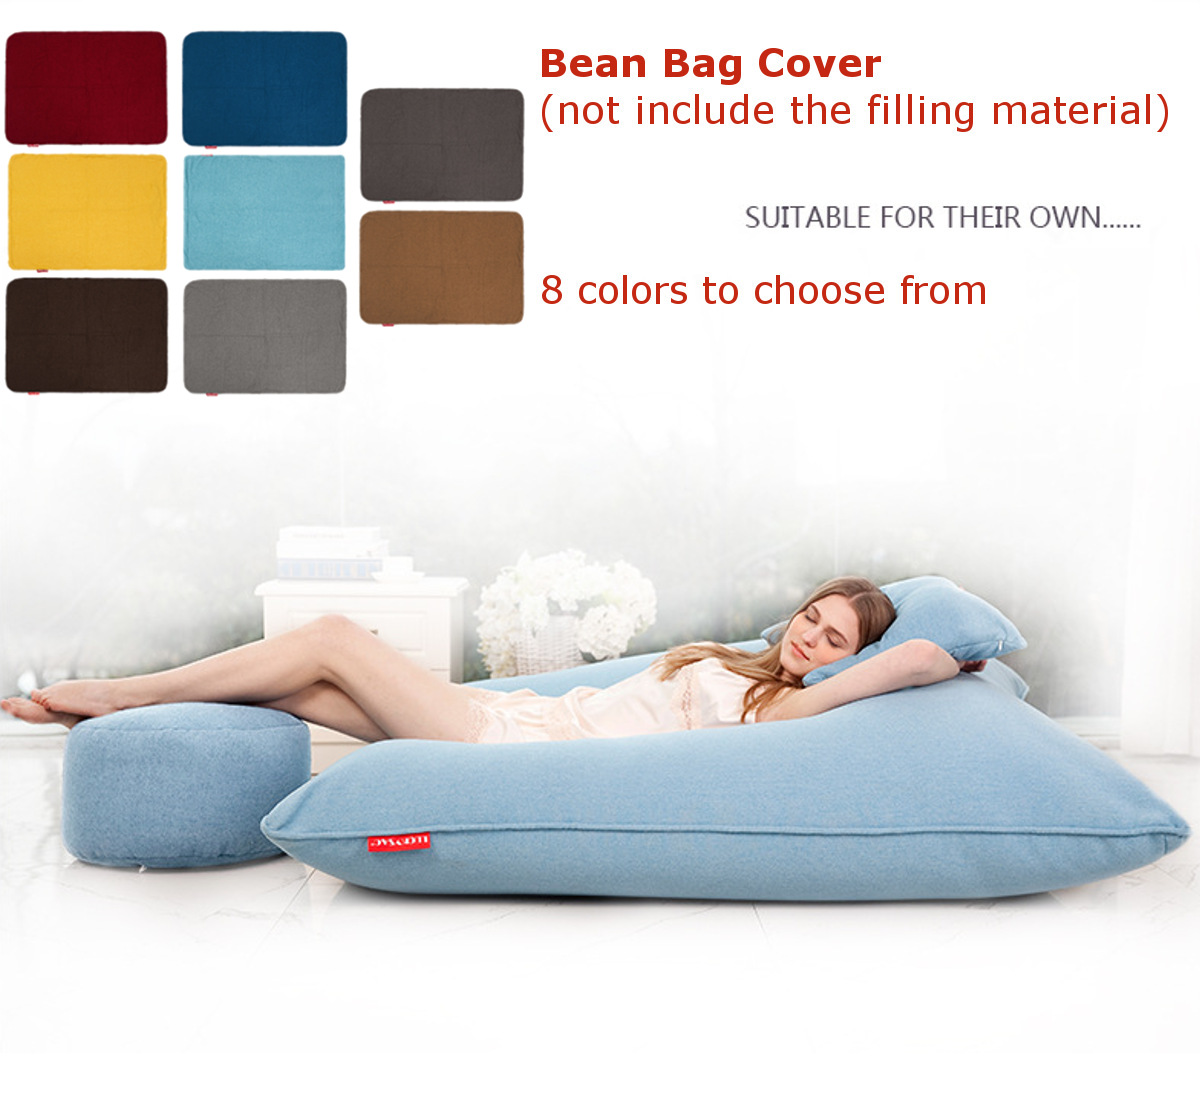 Large-Small-Lazy-Sofas-Covers-Chair-without-Filler-Linen-Cloth-Lounger-Seat-Bean-Bag-Pouf-Puff-Couch-1410995-1